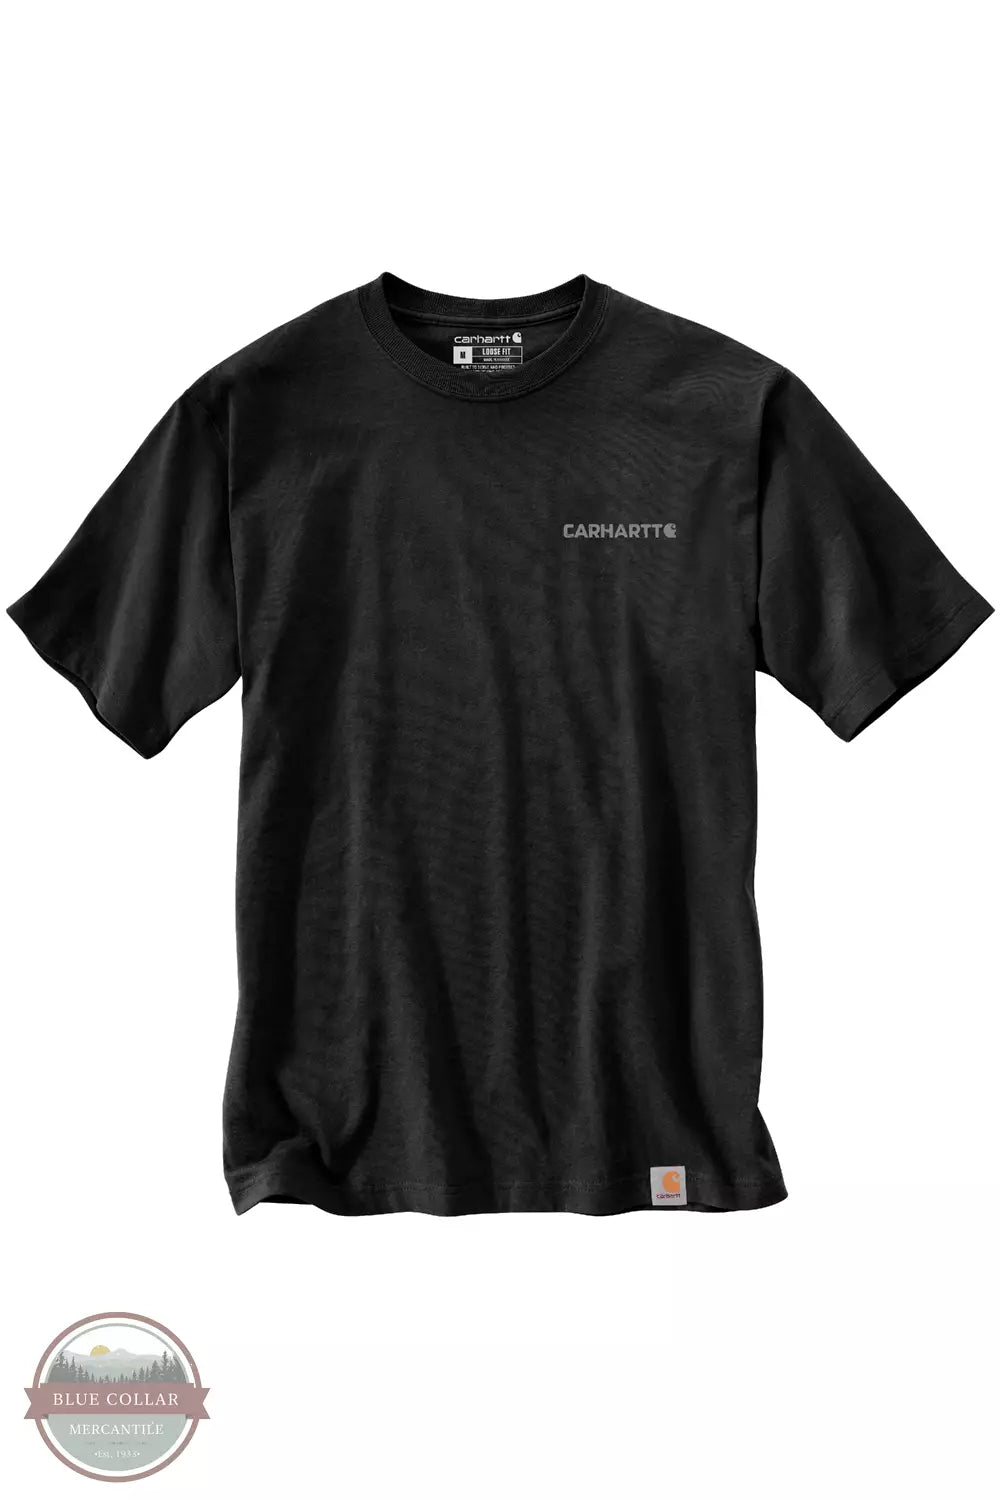 Carhartt 106154 Built to Last Graphic Loose Fit Heavyweight Short Sleeve T-Shirt Black Front View